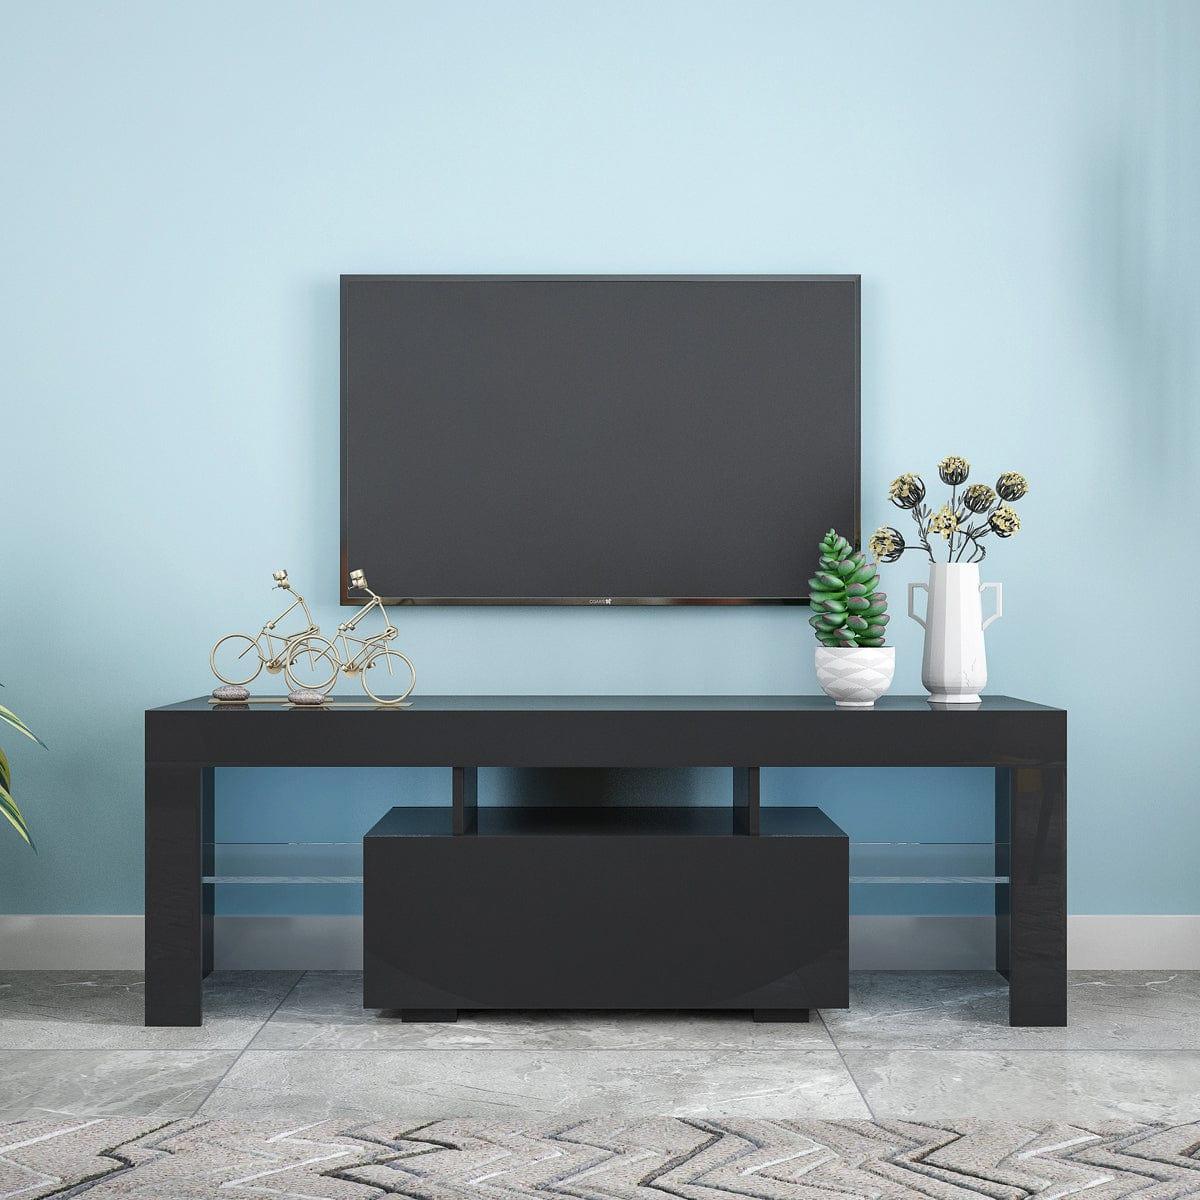 Shop Black TV Stand with LED RGB Lights,Flat Screen TV Cabinet, Gaming Consoles - in Lounge Room, Living Room and Bedroom(Black) Mademoiselle Home Decor